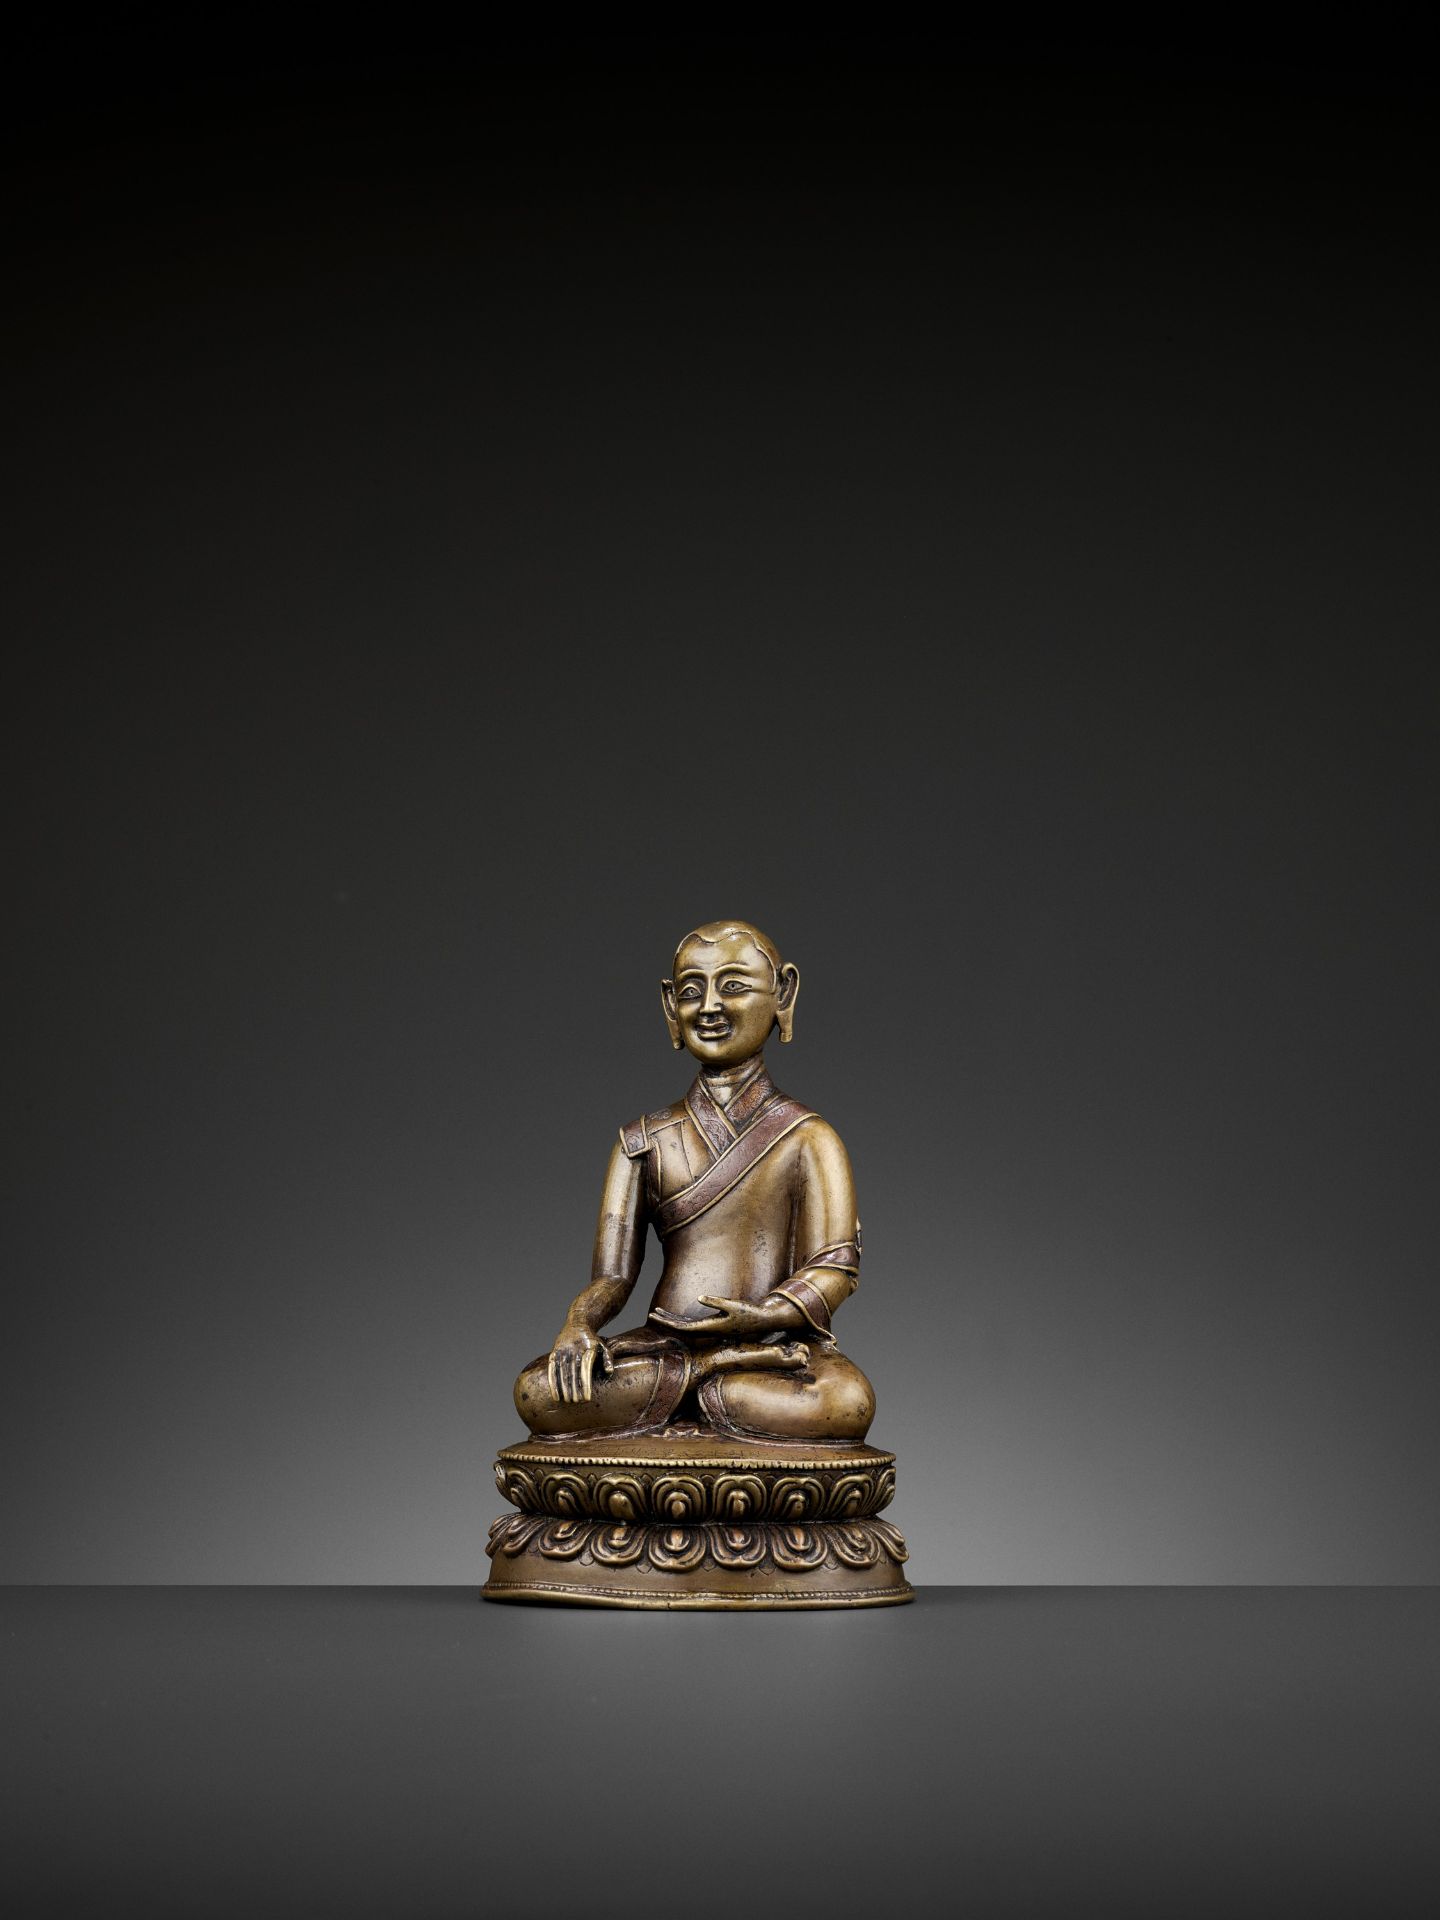 A PORTRAIT BRONZE OF A MONK, COPPER- AND SILVER-INLAID, 16TH-18TH CENTURY - Image 10 of 12